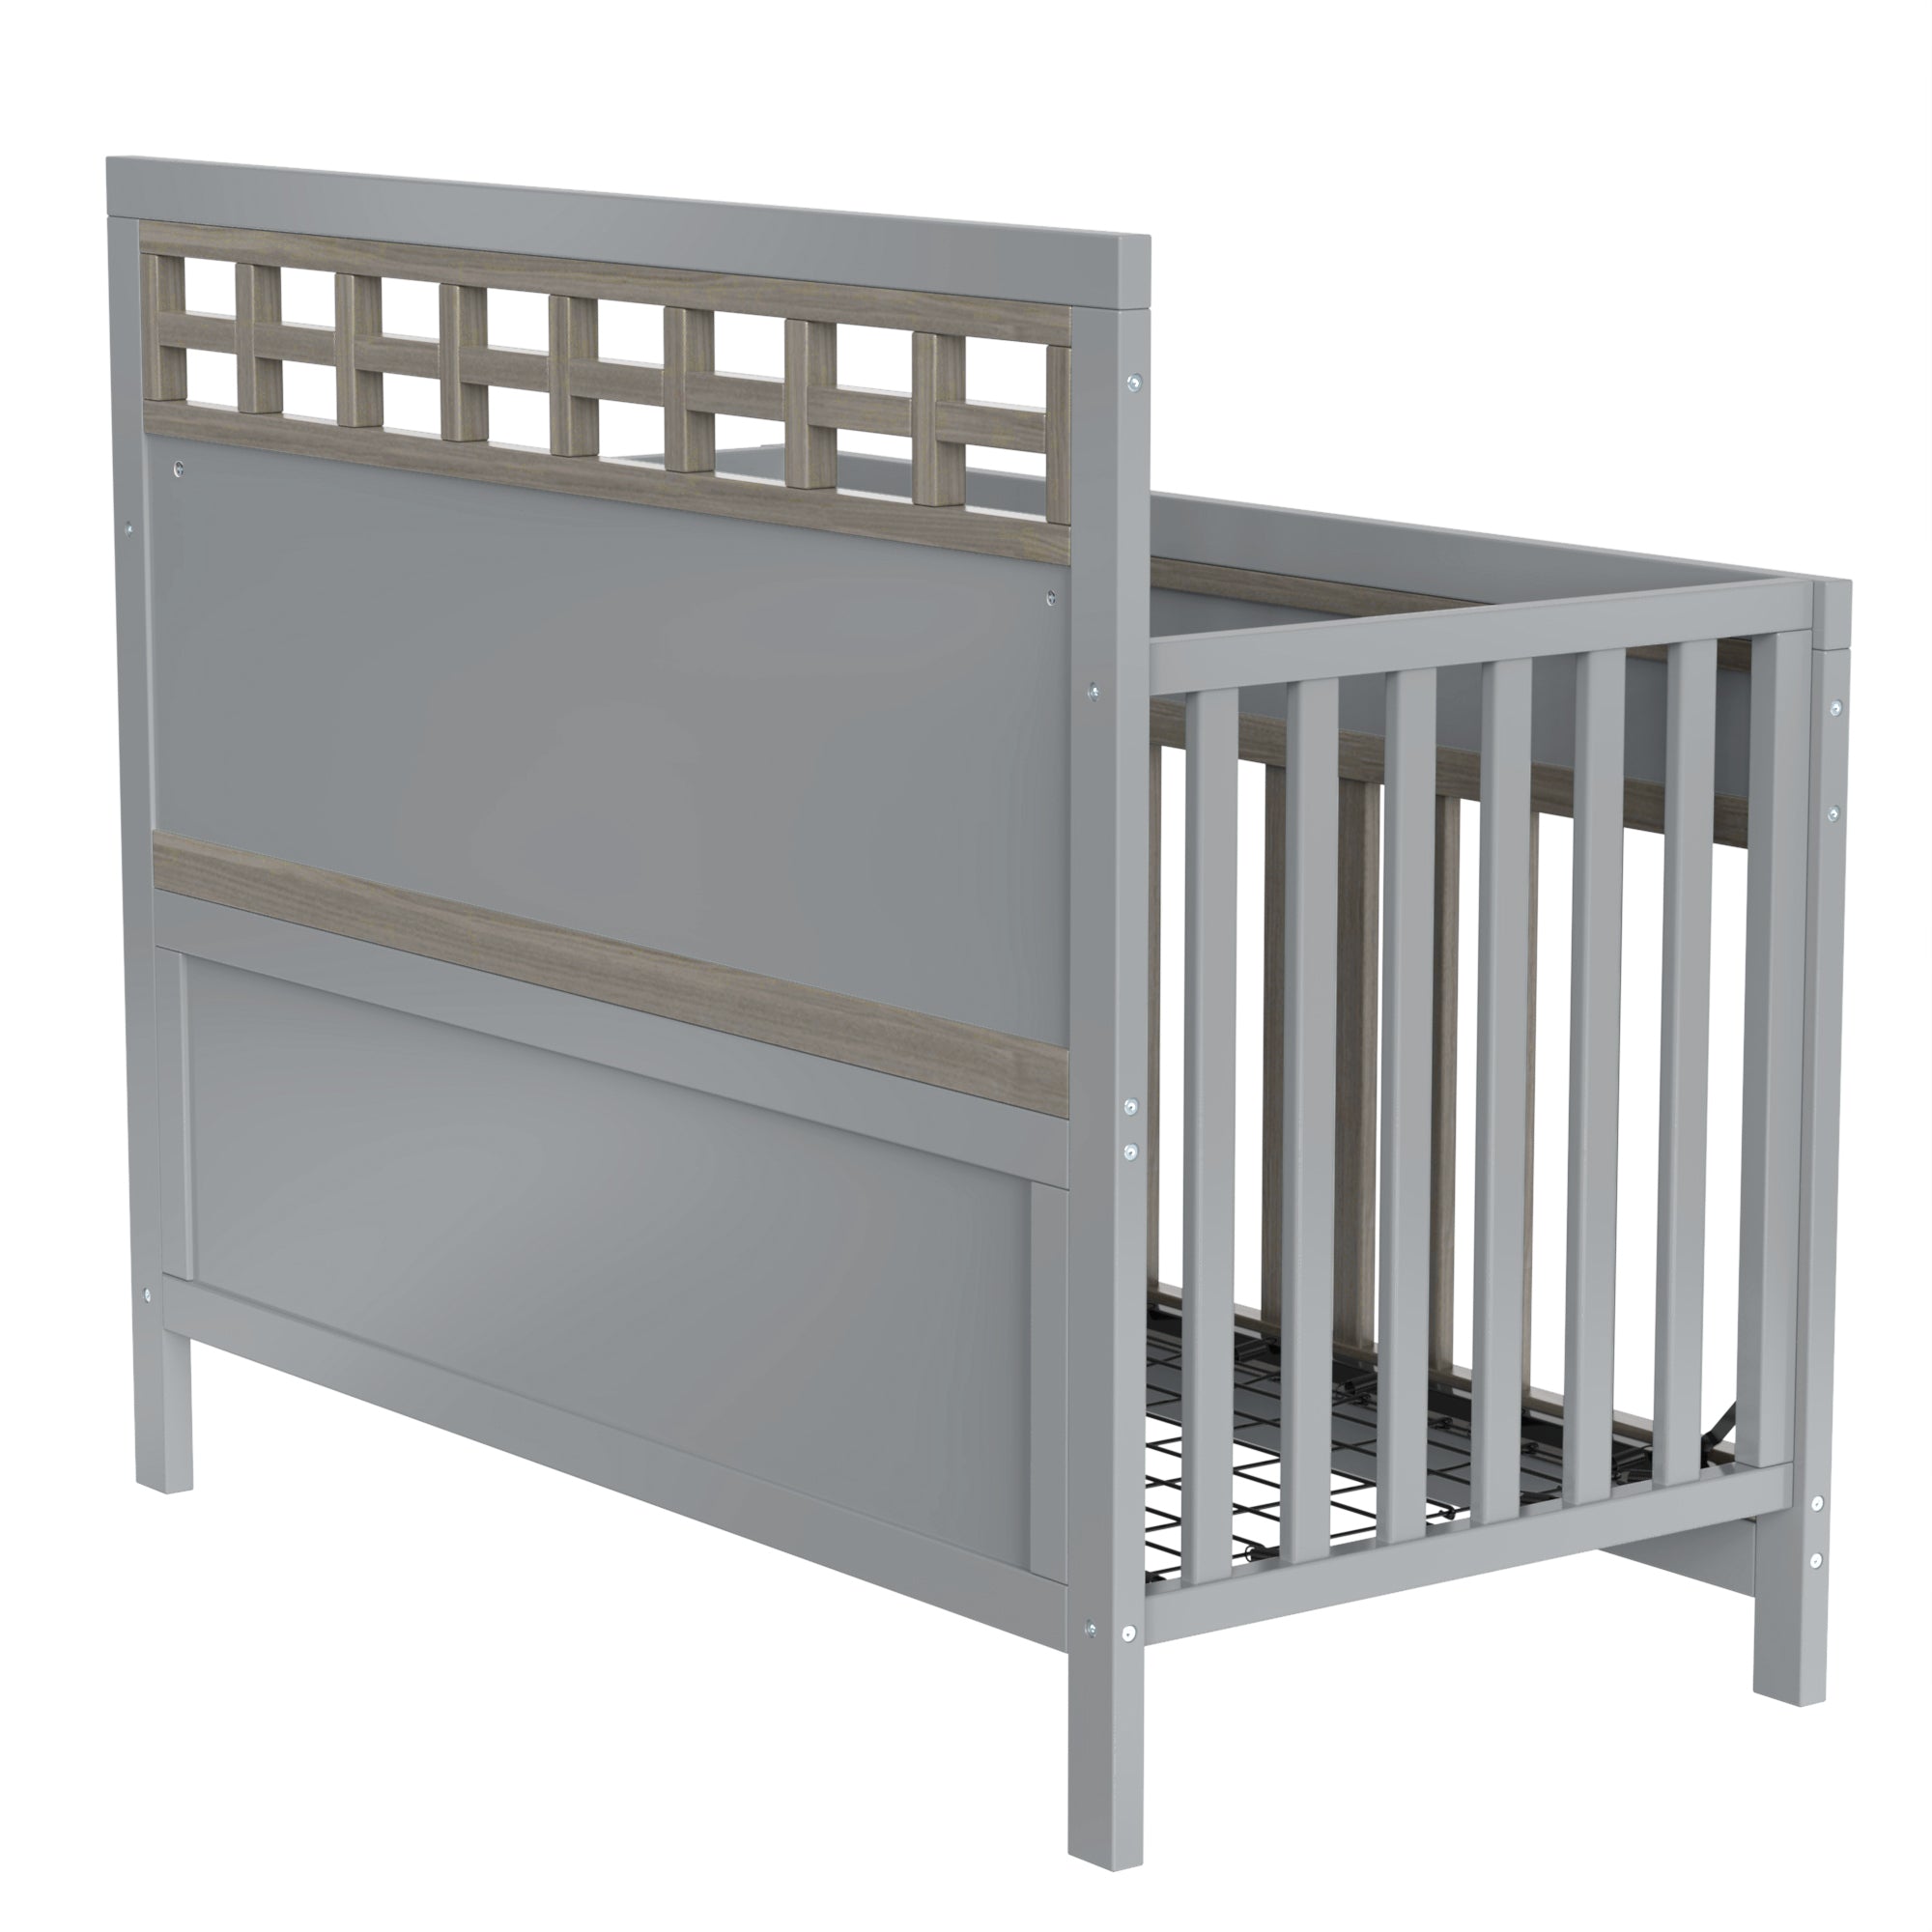 Certified Baby Safe Crib, Pine Solid Wood, Non Toxic gray-solid wood+mdf